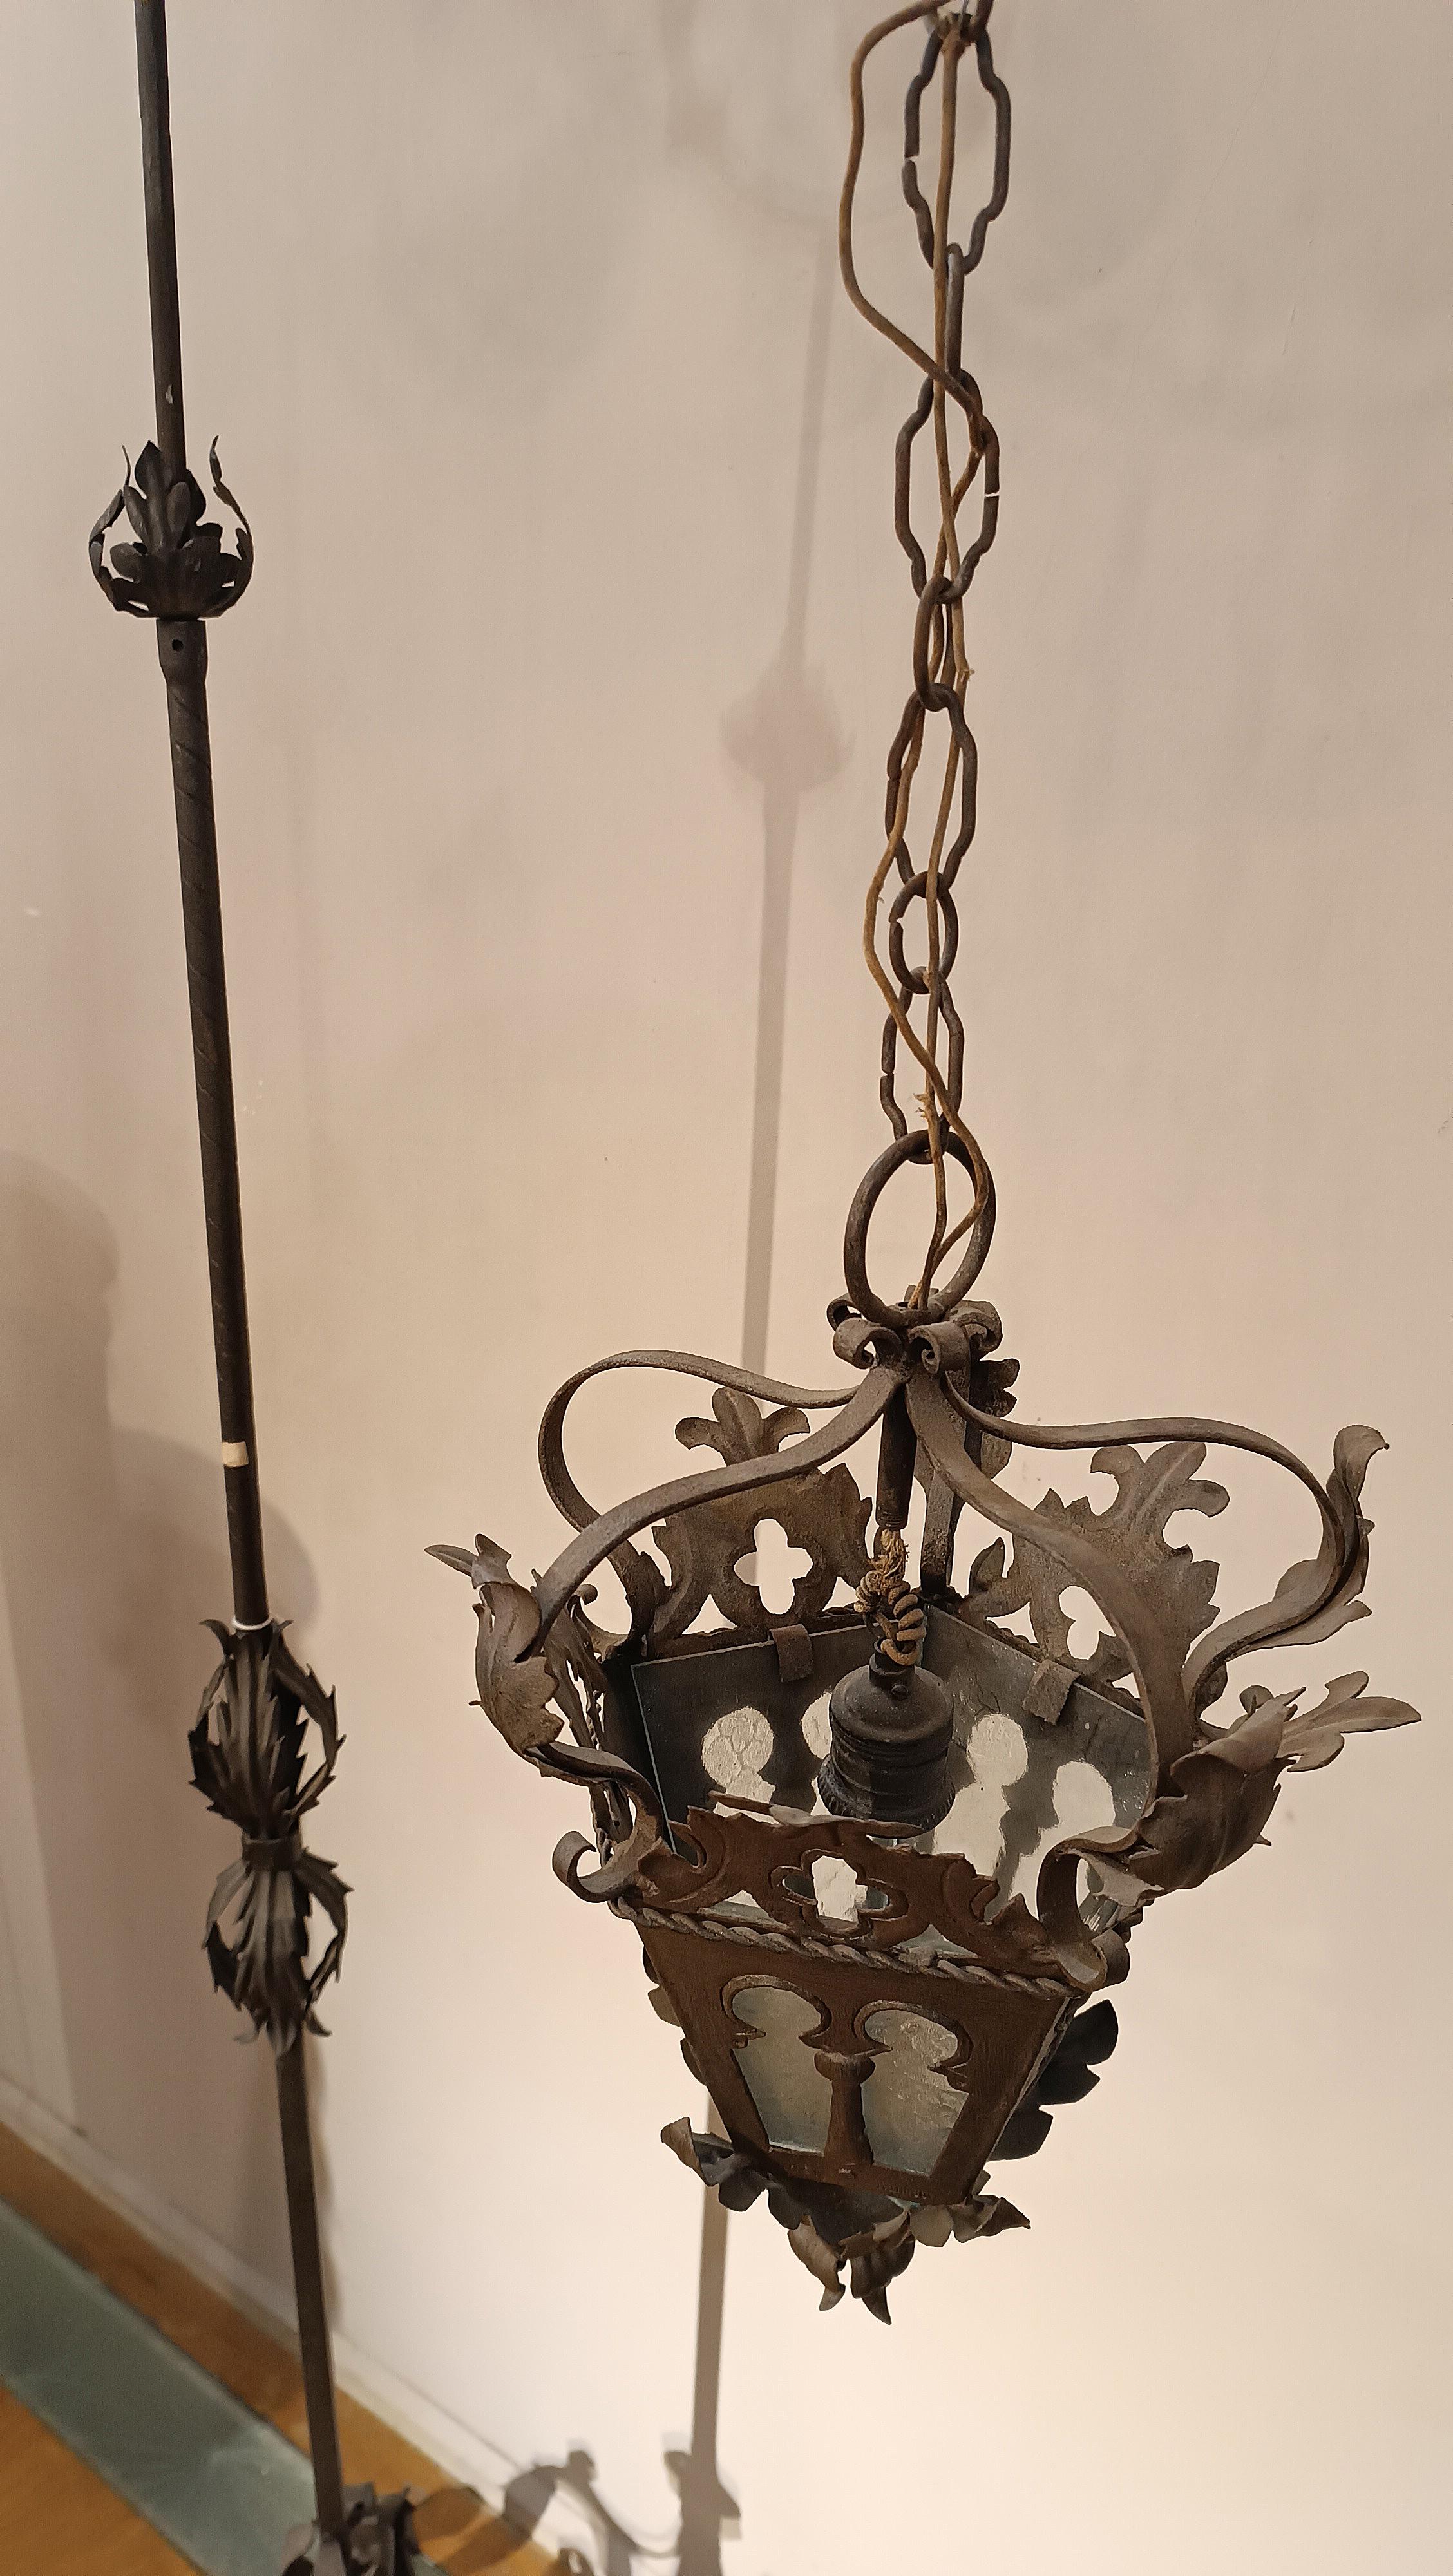 END OF THE 19th CENTURY IRON LANTERN HOLDER For Sale 7